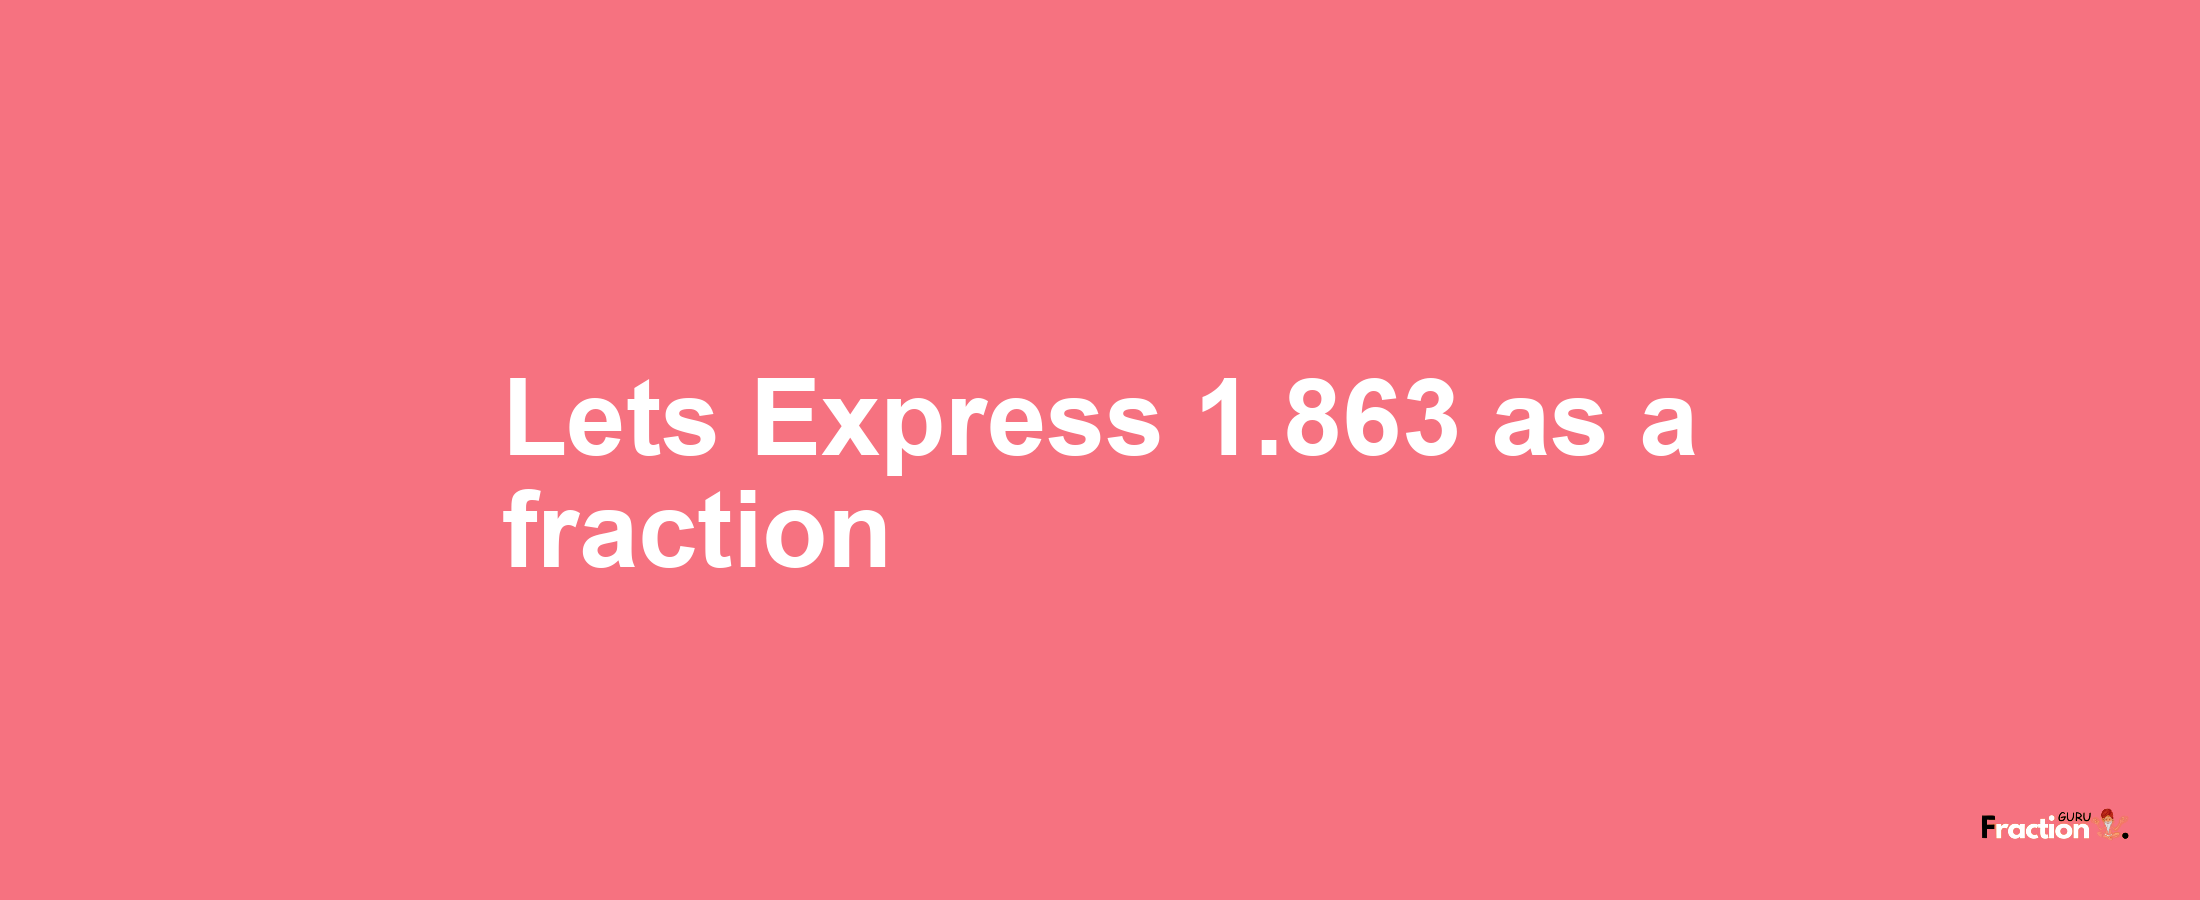 Lets Express 1.863 as afraction